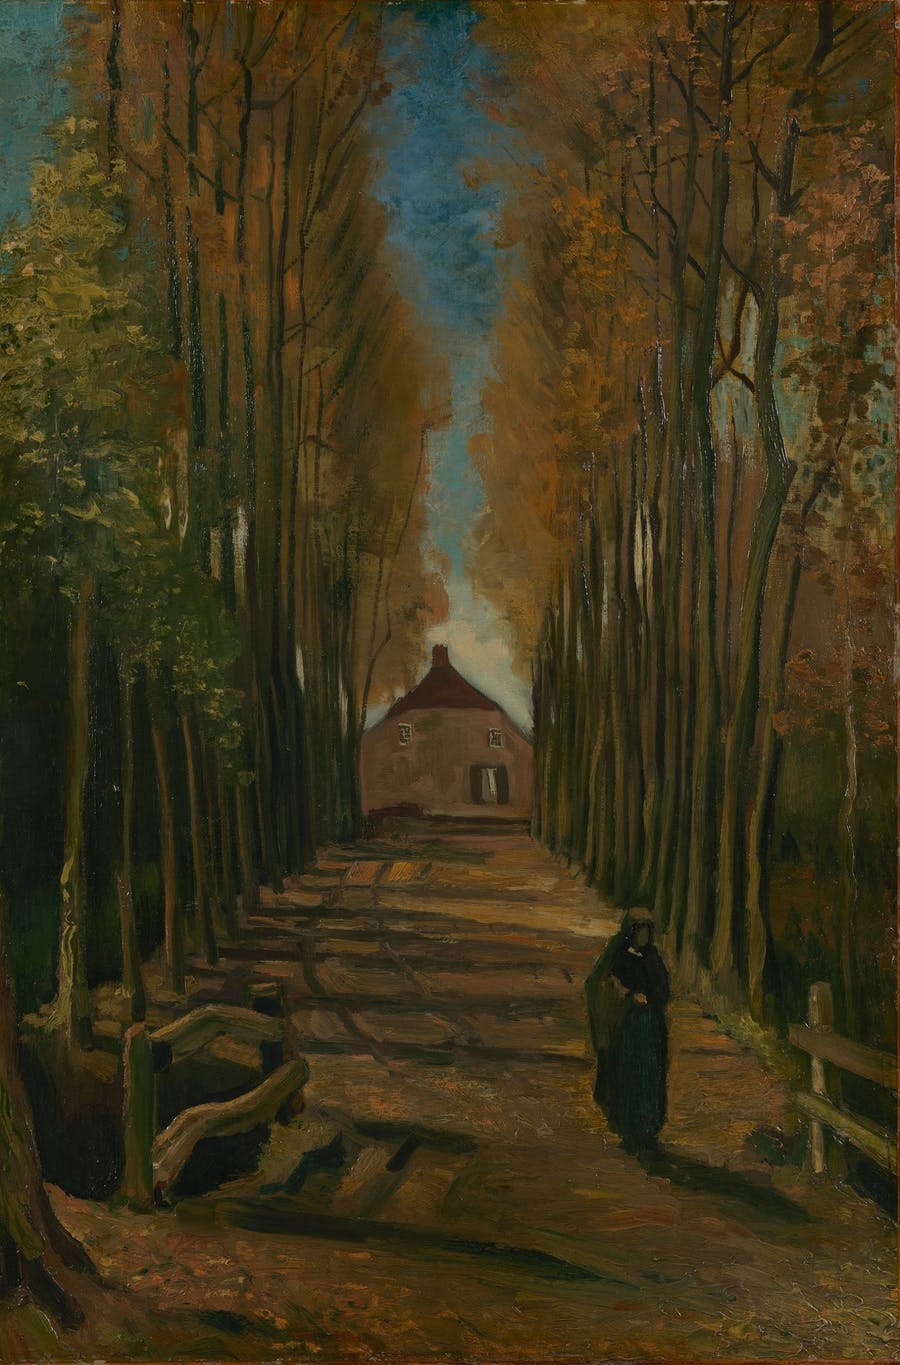 Vincent Van Gogh, Alley of Poplars in Autumn, 1884, oil on canvas on panel, Van Gogh Museum in Amsterdam. Image: CC0